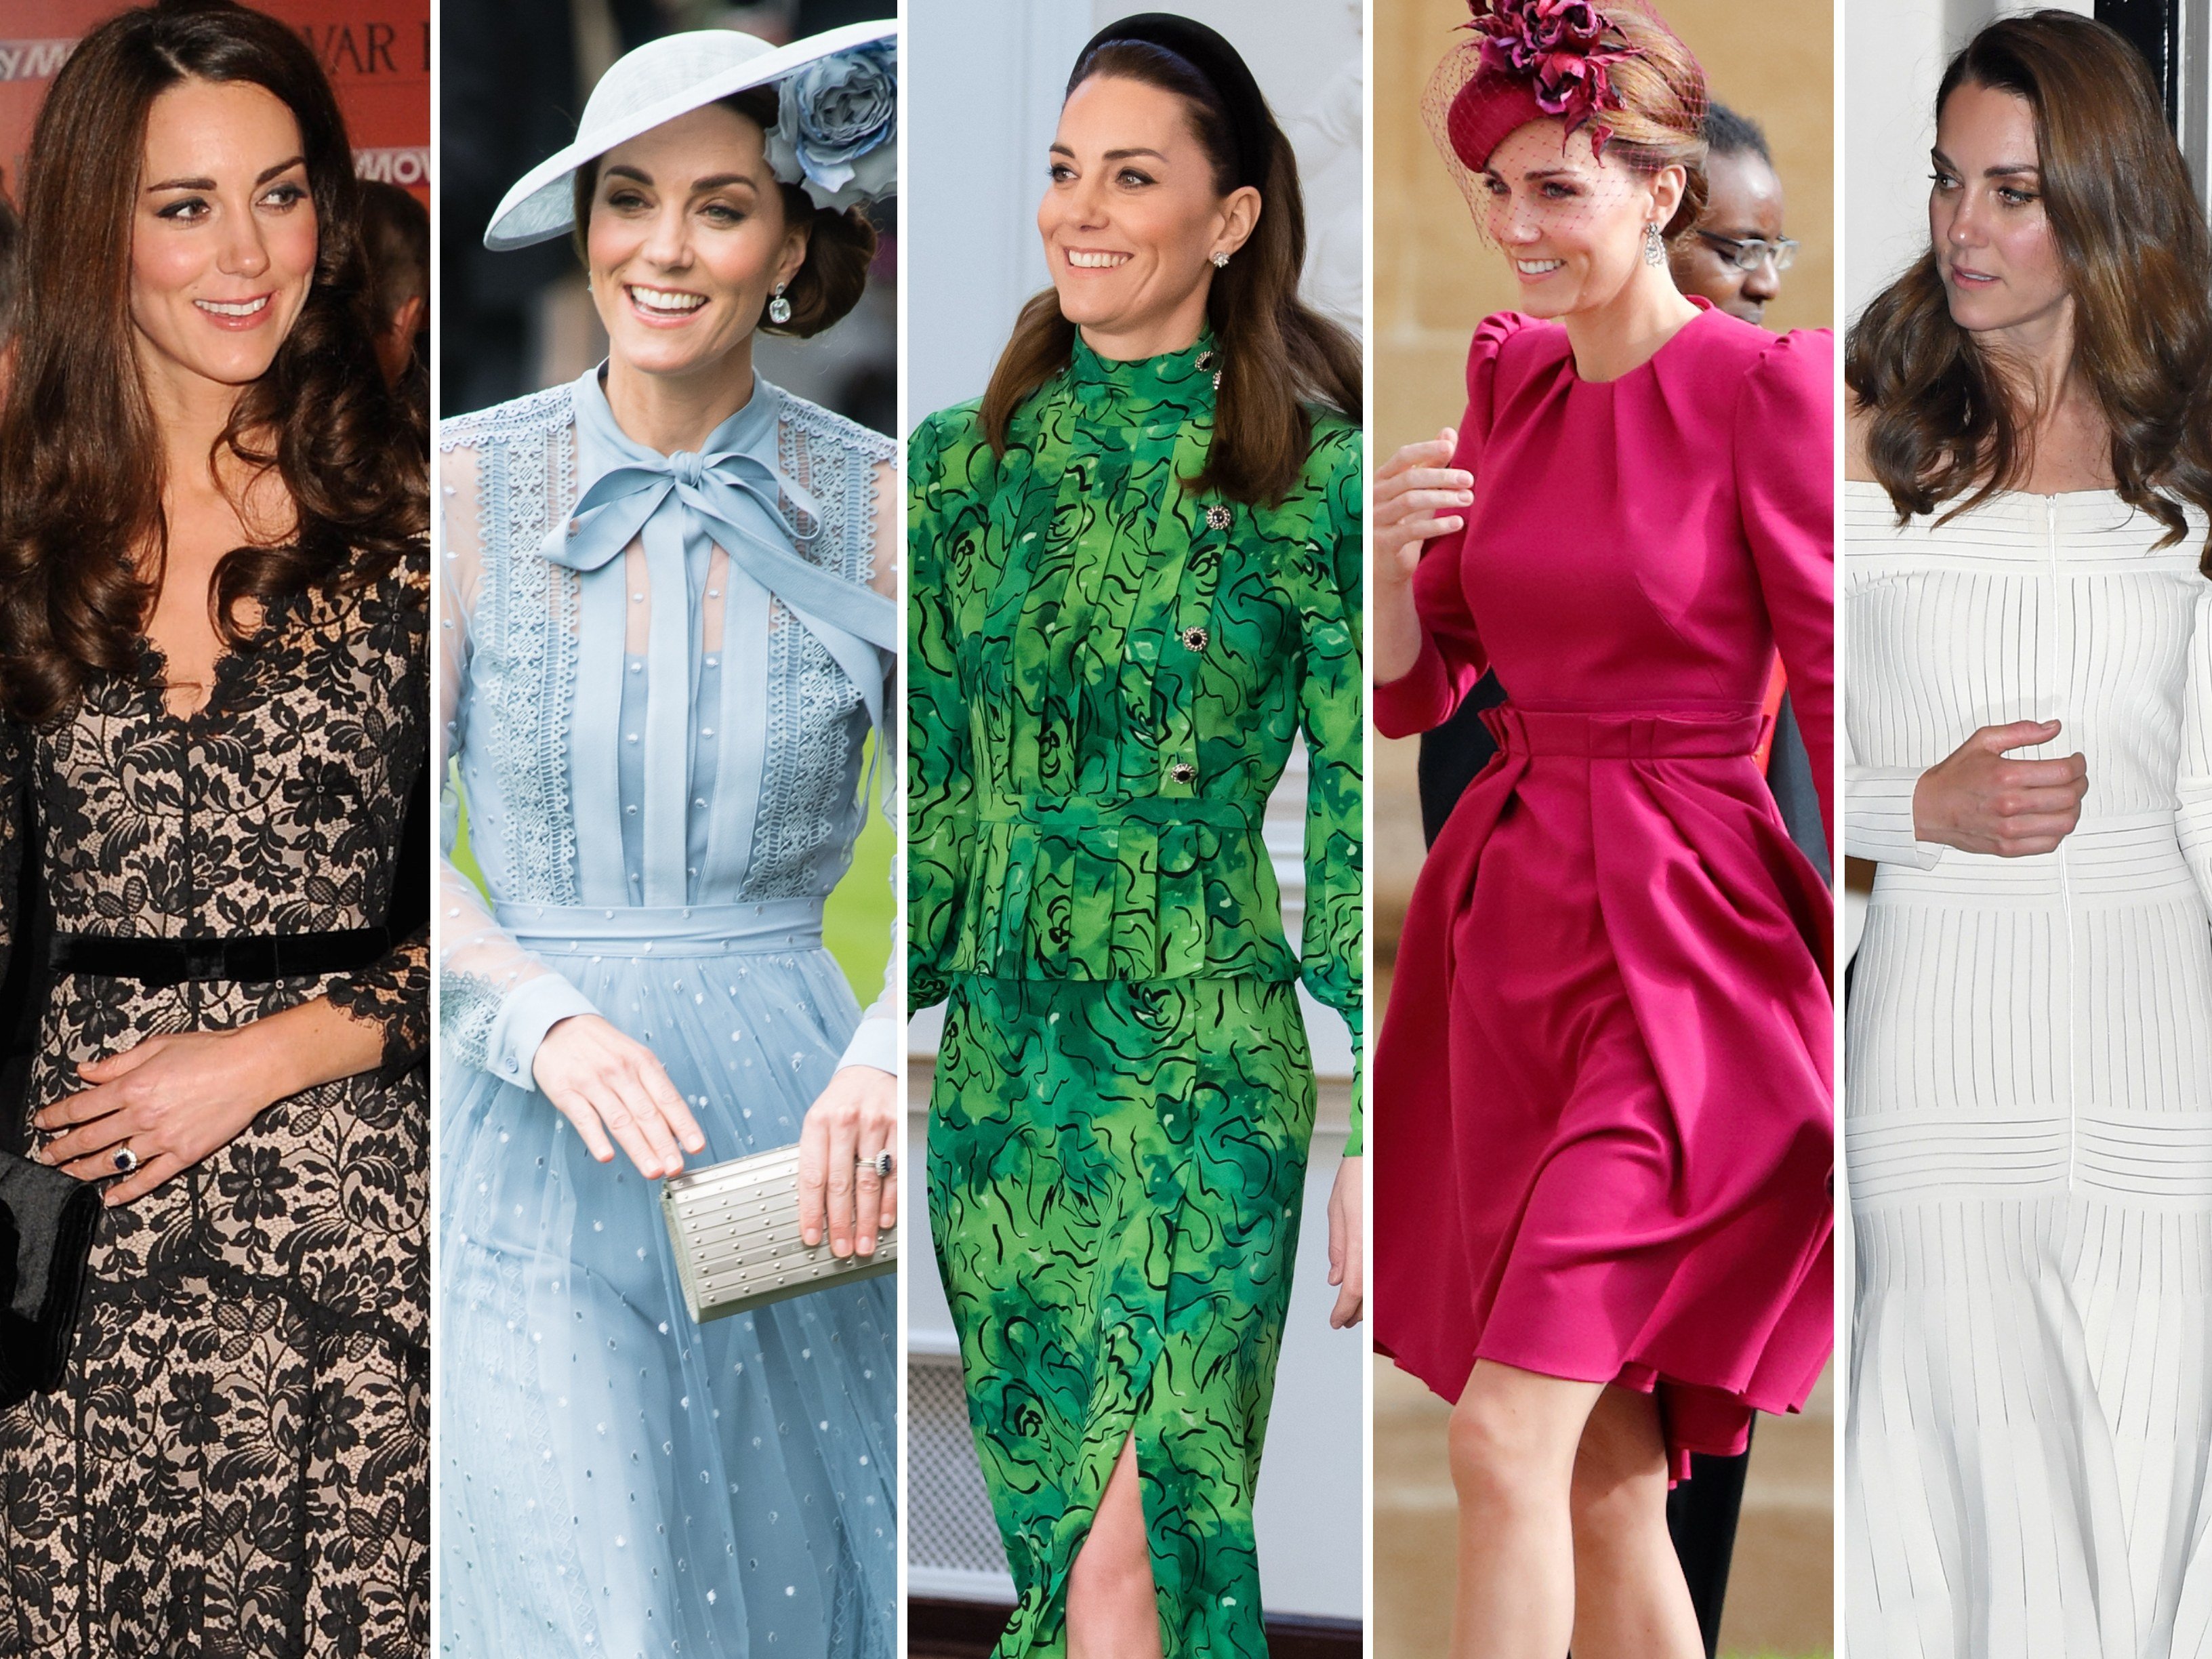 Hip hip hooray for Kate Middleton’s ever-stylish fashion looks as the Princess of Wales turned 41. Photos: Getty